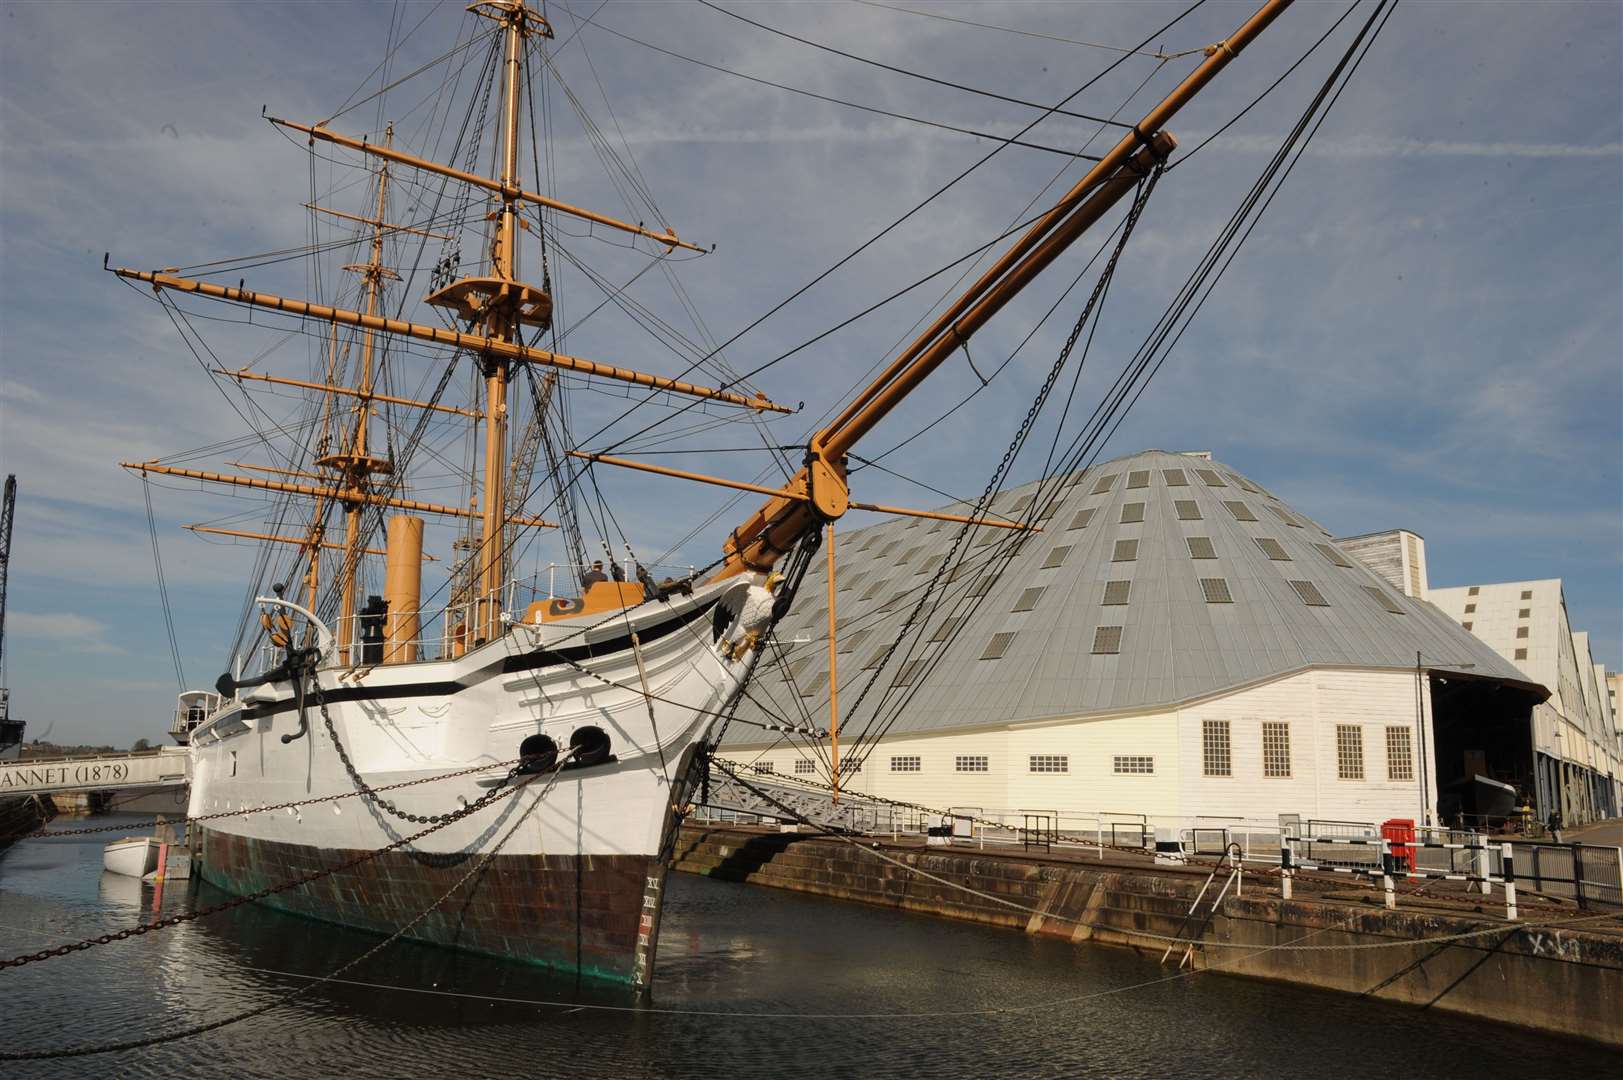 The exhibition will be held at Chatham Historic Dockyard from February 12